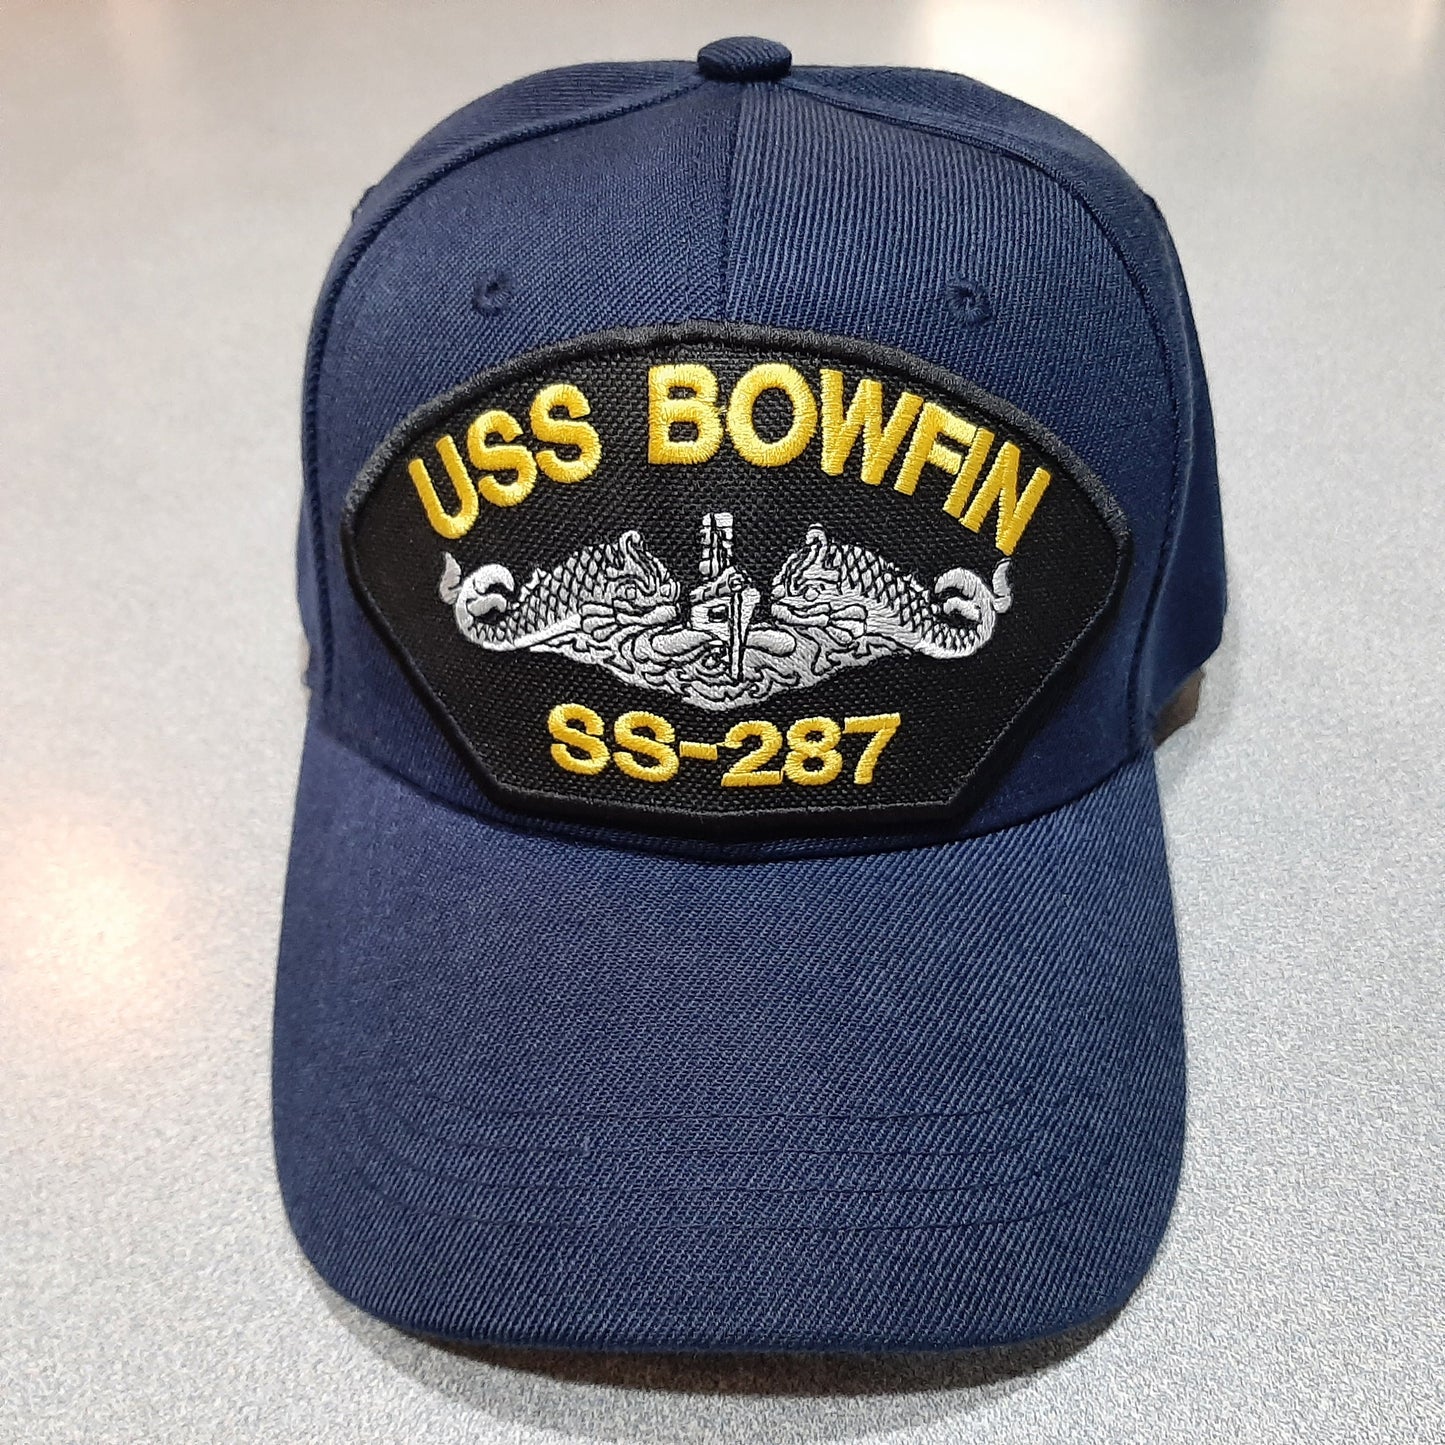 USS Bowfin SS-287 Submarine Service Boat Embroidered Patch Navy Blue Cap Hat Adjustable Strap